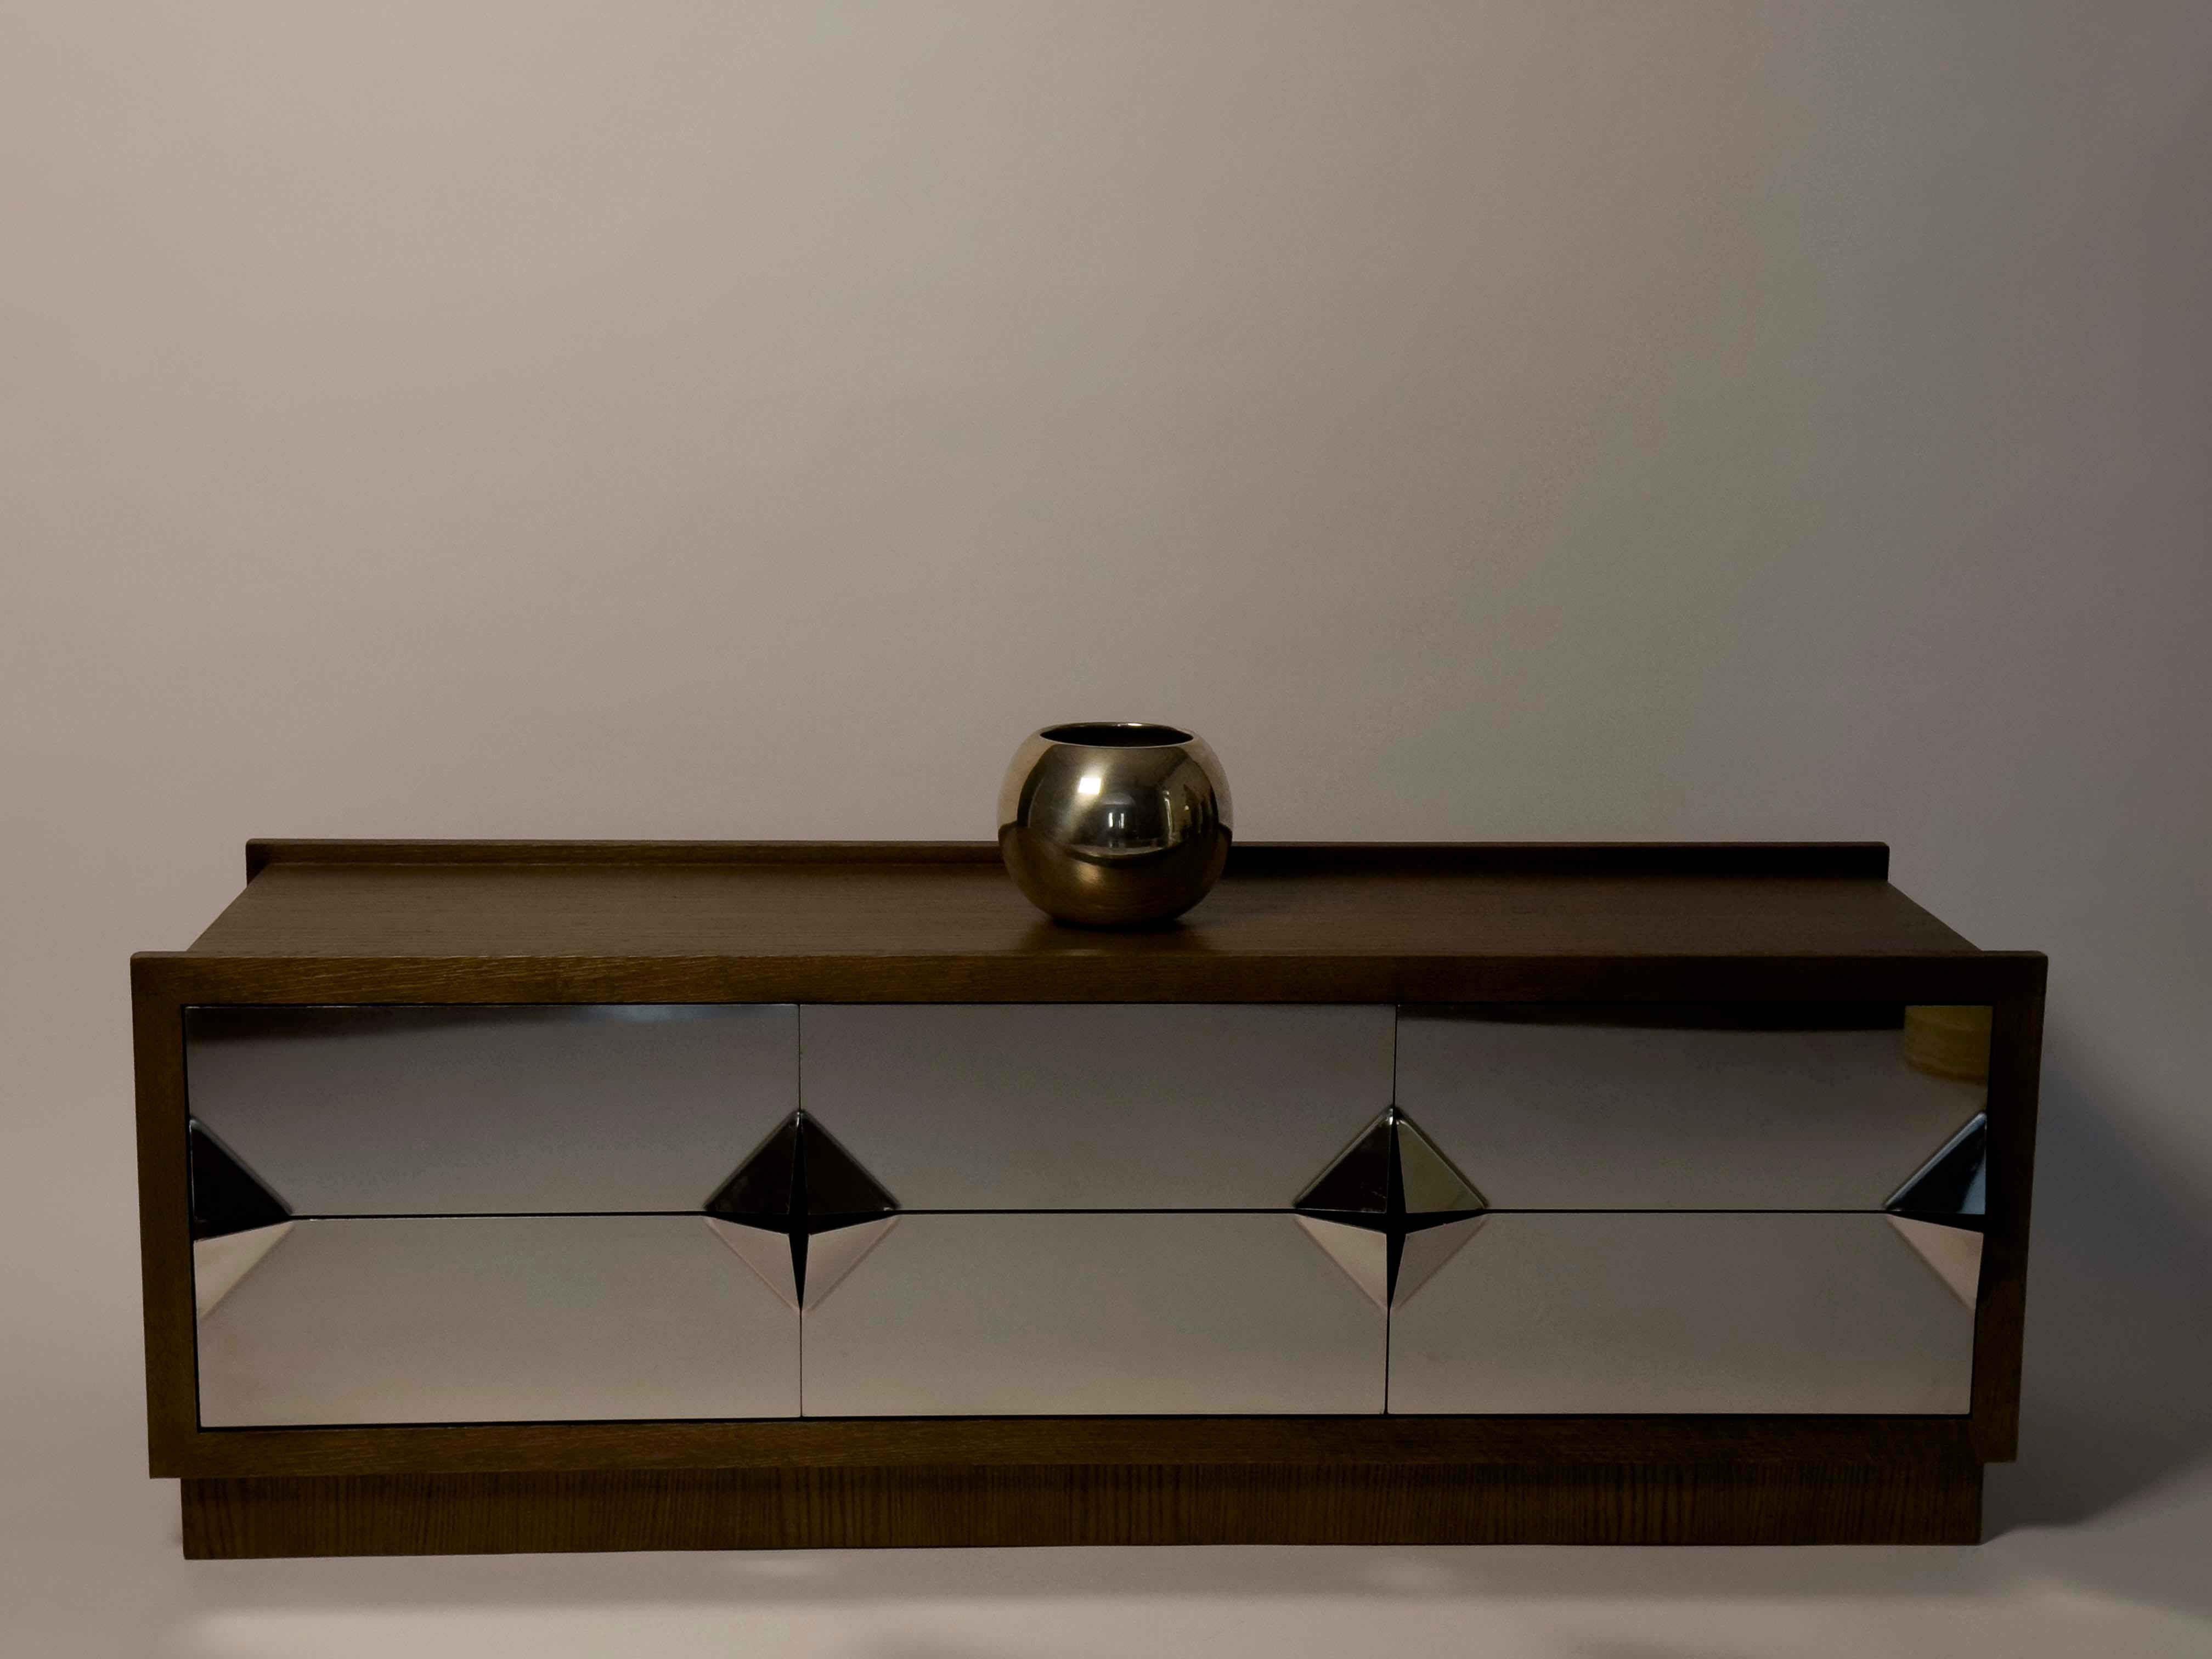 The NIGMA TV console, shown here in walnut stained, oak with drawer fronts in mirror-polished, stainless steel. The console is designed by Hassan Abouseda for HAF.Custom made to order through 1stDibs. Also available in our showroom in Cairo, Egypt.